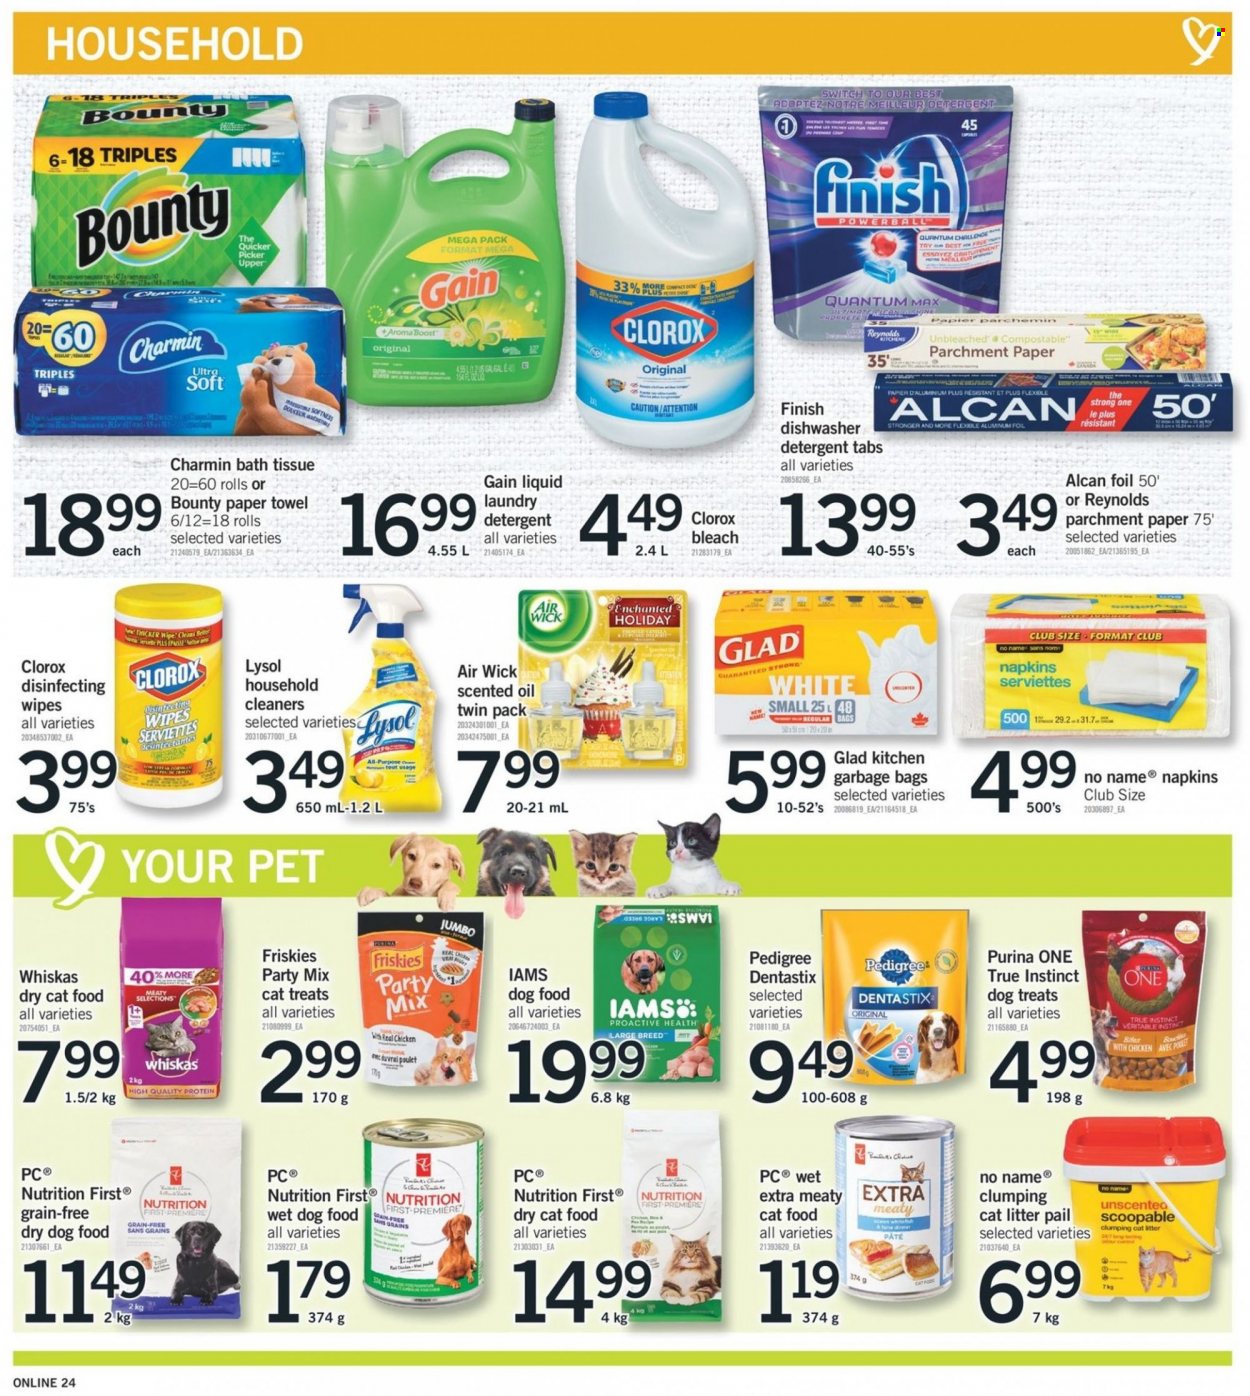 thumbnail - Fortinos Flyer - January 06, 2022 - January 12, 2022 - Sales products - No Name, Bounty, switch, Boost, wipes, napkins, bath tissue, paper towels, Charmin, Gain, bleach, Lysol, Clorox, laundry detergent, aluminium foil, Air Wick, scented oil, cat litter, PREMIERE, animal food, cat food, dog food, wet dog food, Purina, Dentastix, Pedigree, dry dog food, dry cat food, Friskies, Iams, detergent, Whiskas. Page 25.